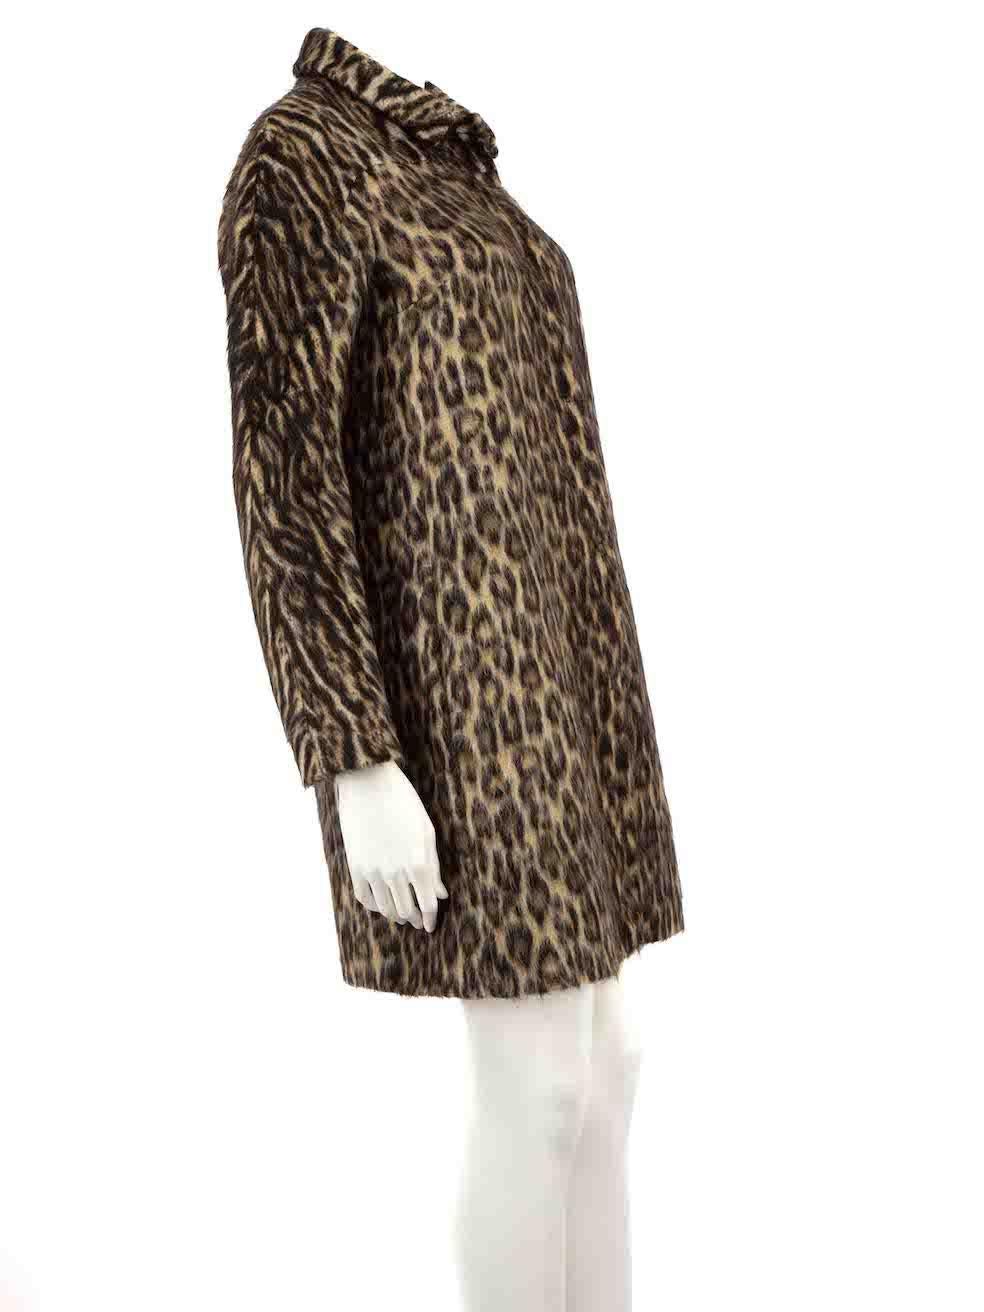 CONDITION is Very good. Minimal wear to coat is evident. Minimal wear with the brand label at the rear neckline lining having become detached at one side on this used Giambattista Valli designer resale item.
 
Details
Brown
Brushed wool
Coat
Leopard